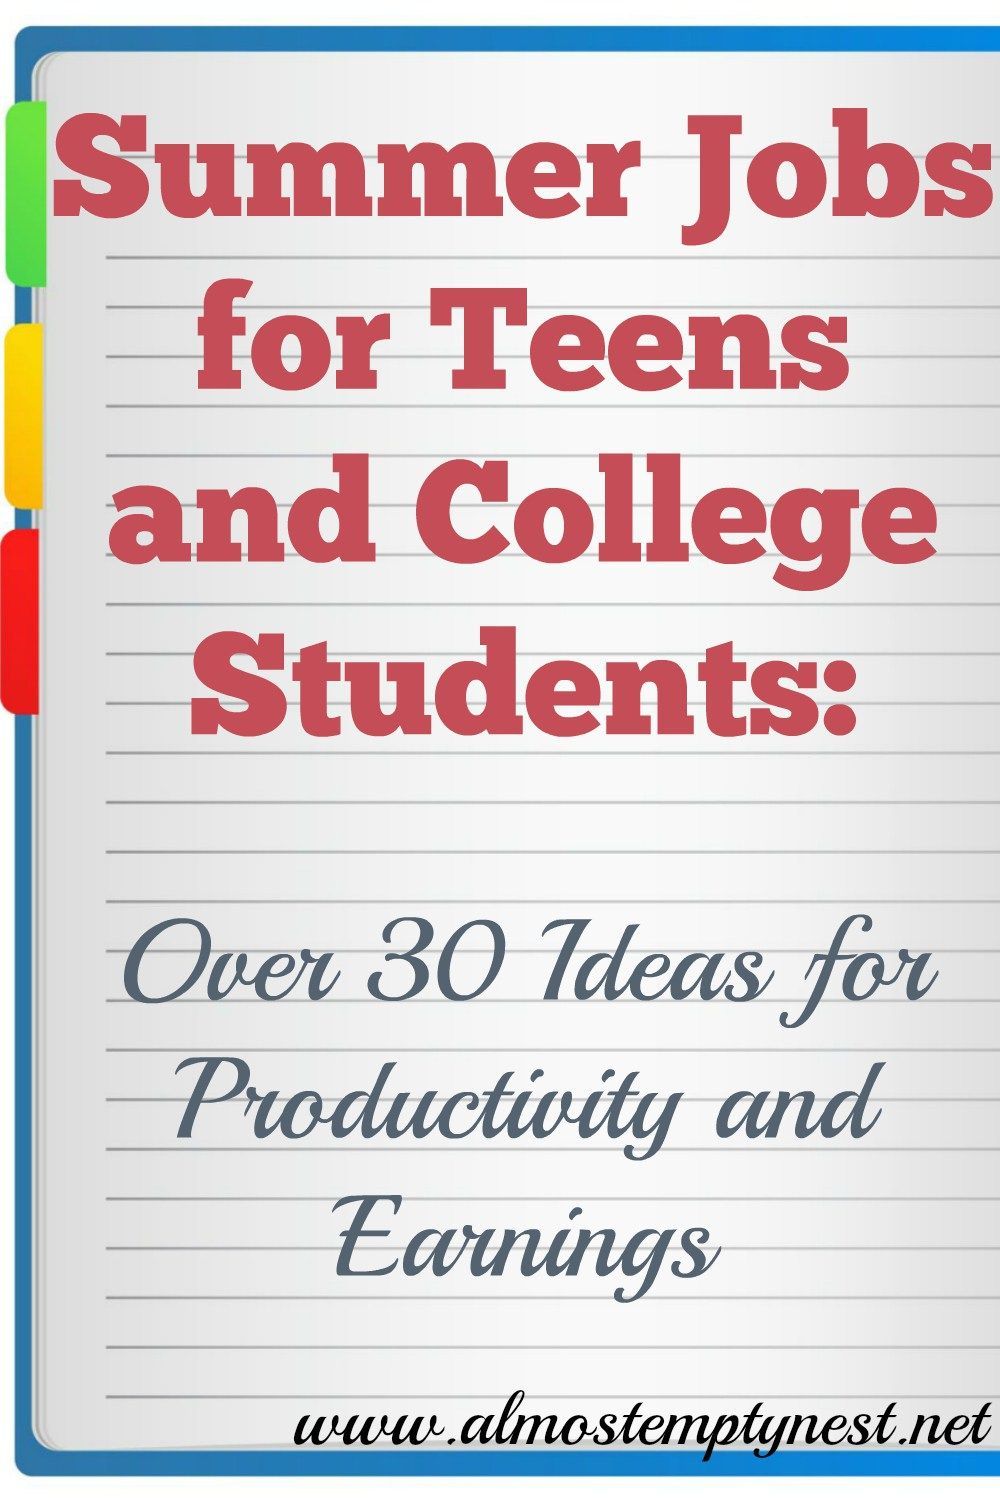 Summer Jobs for Teens and College Students: Over 30 Ideas for Productivity and Earnings - Summer Jobs for Teens and College Students: Over 30 Ideas for Productivity and Earnings -   18 diy For Teens college students ideas